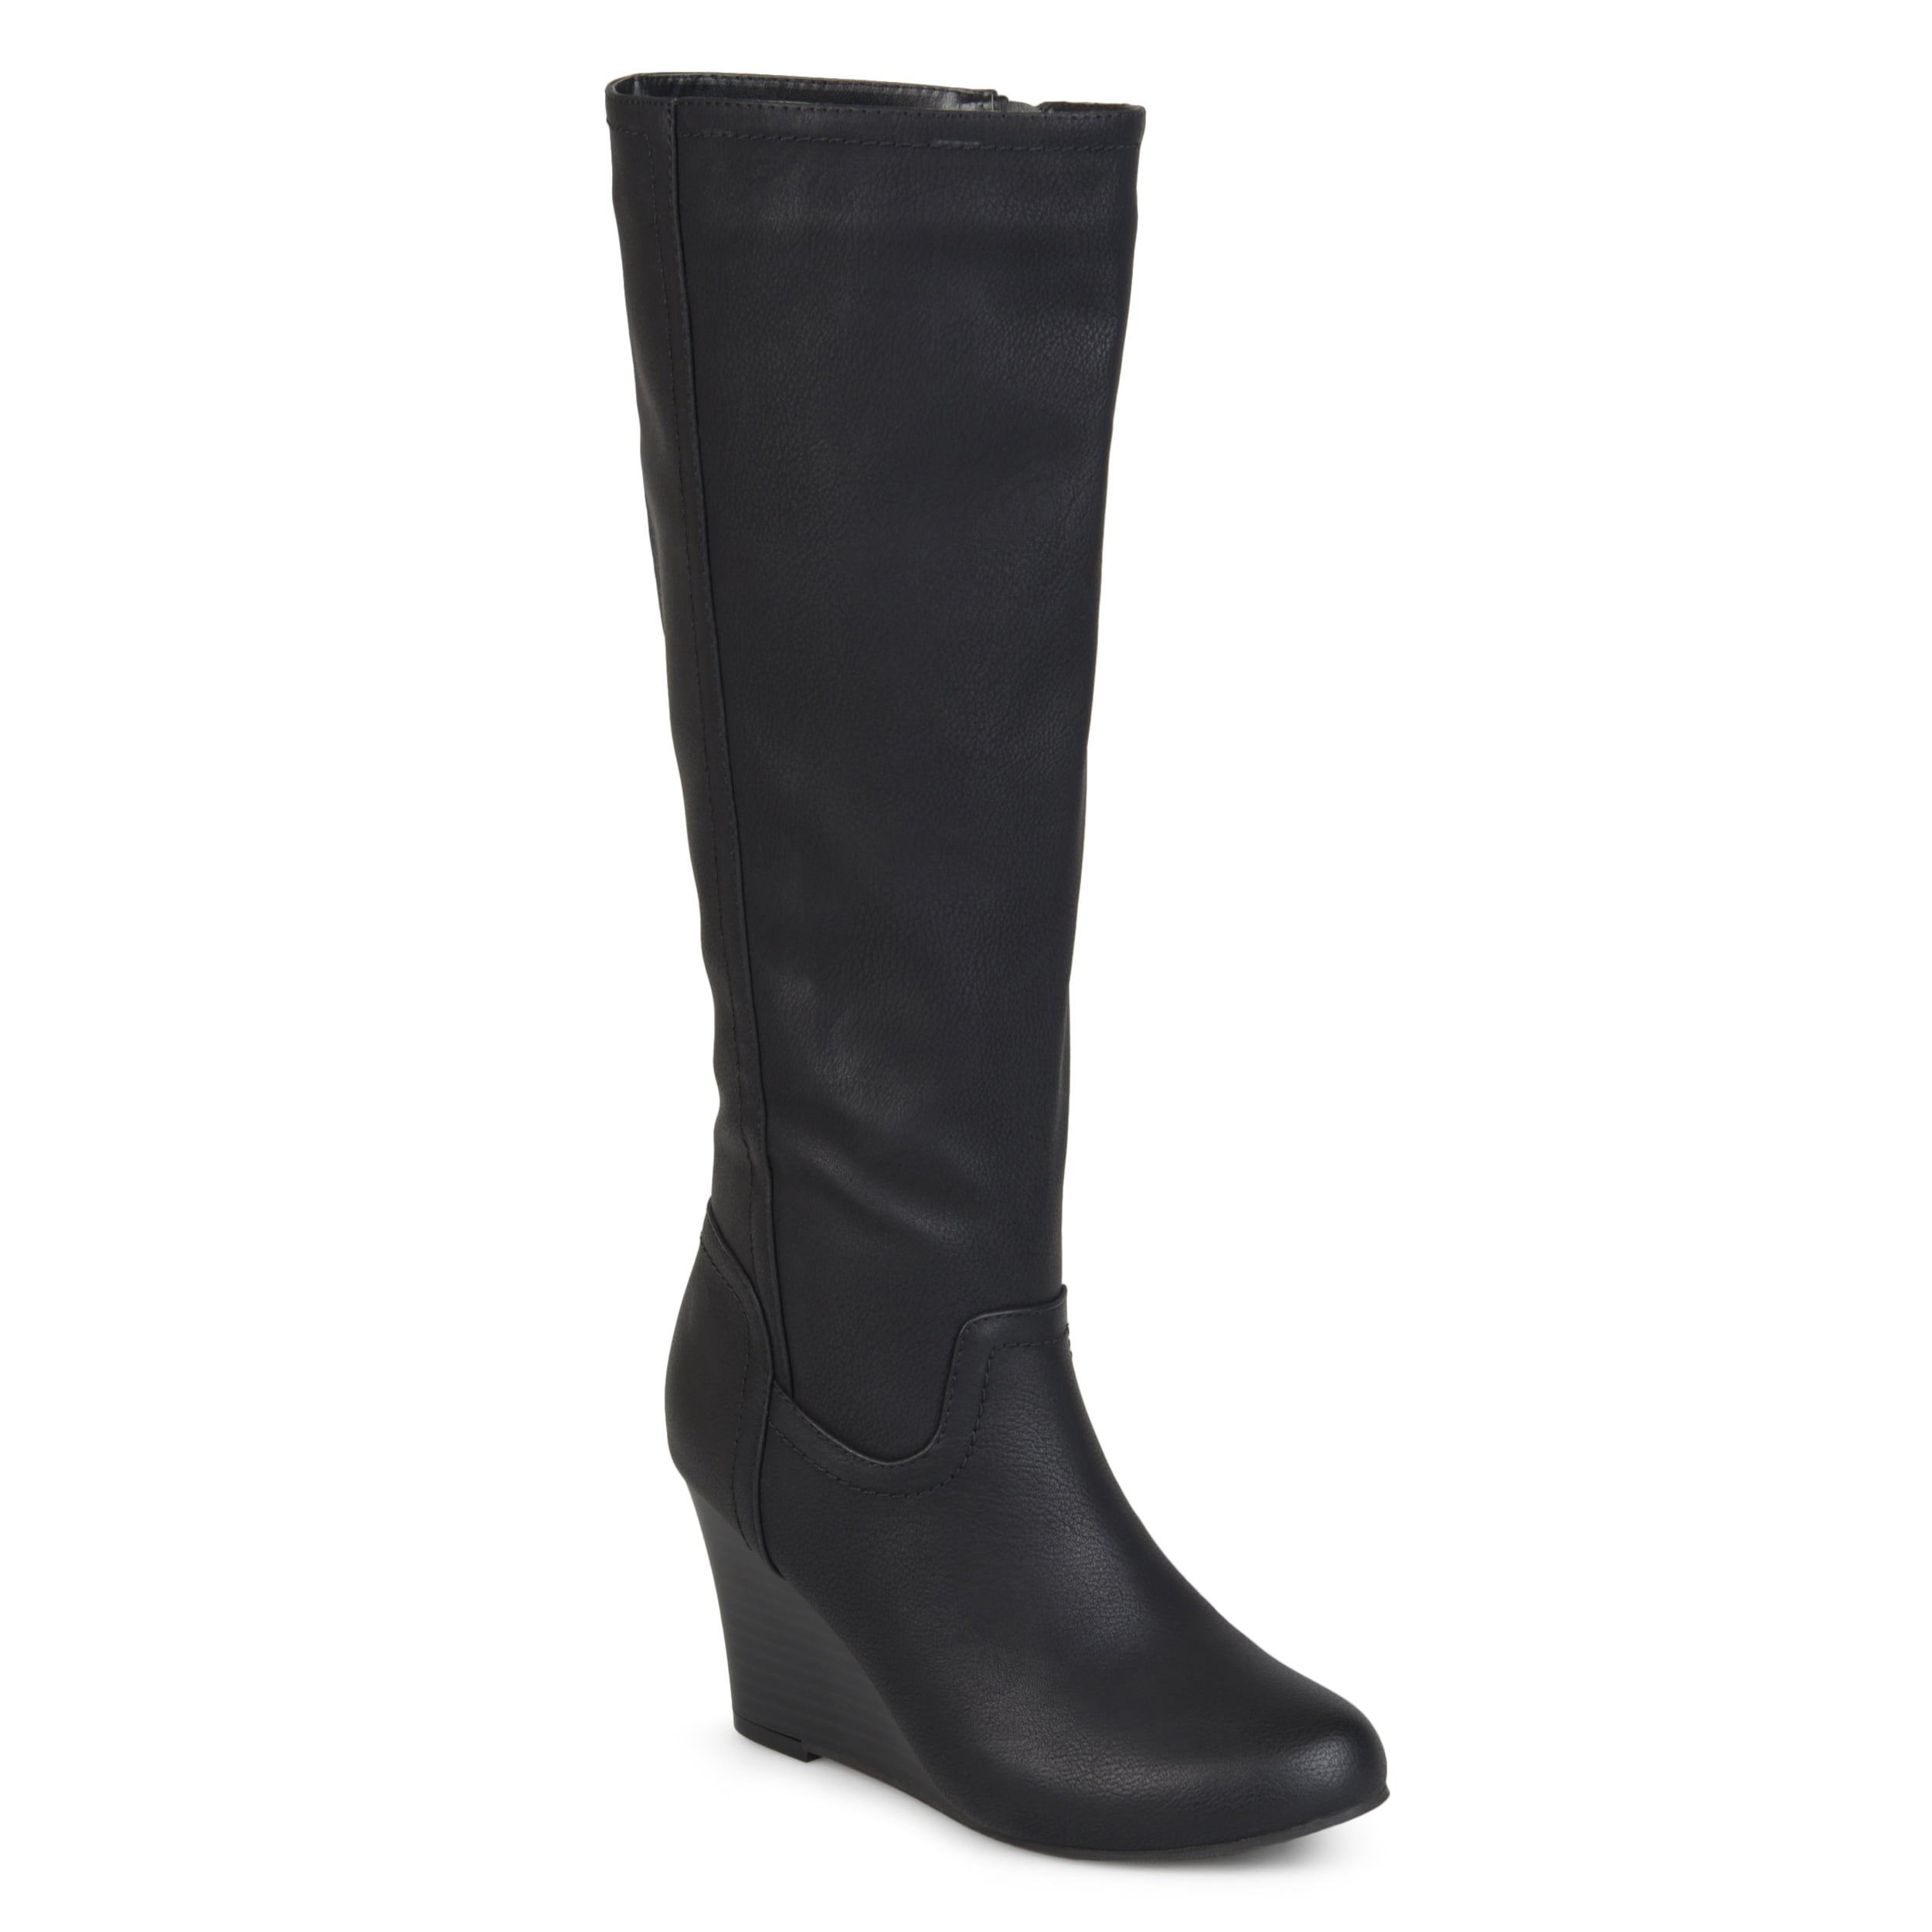 journee collection langly wedge boot